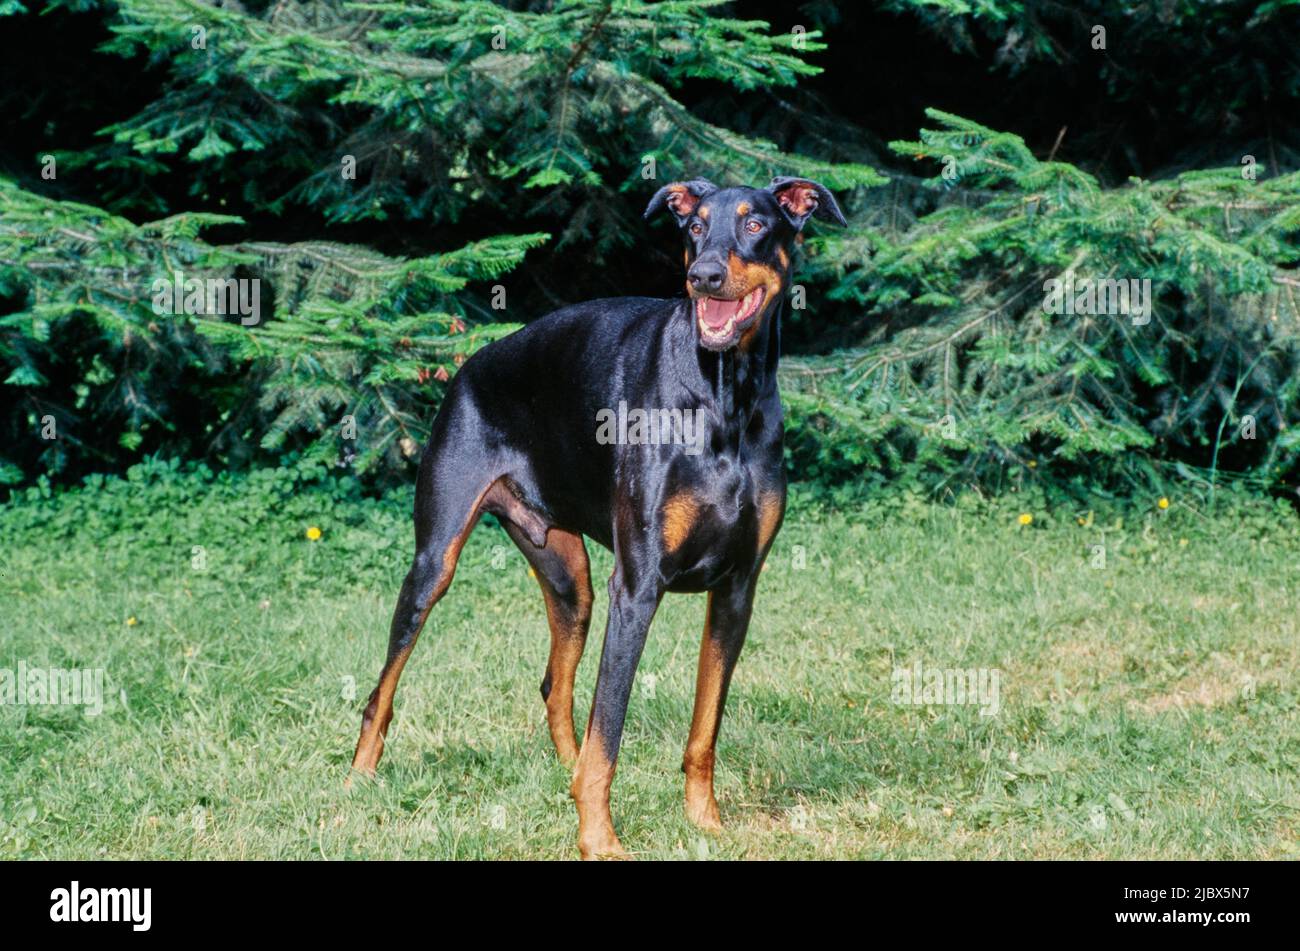 A Doberman standing in grass and yellow flowers Stock Photo